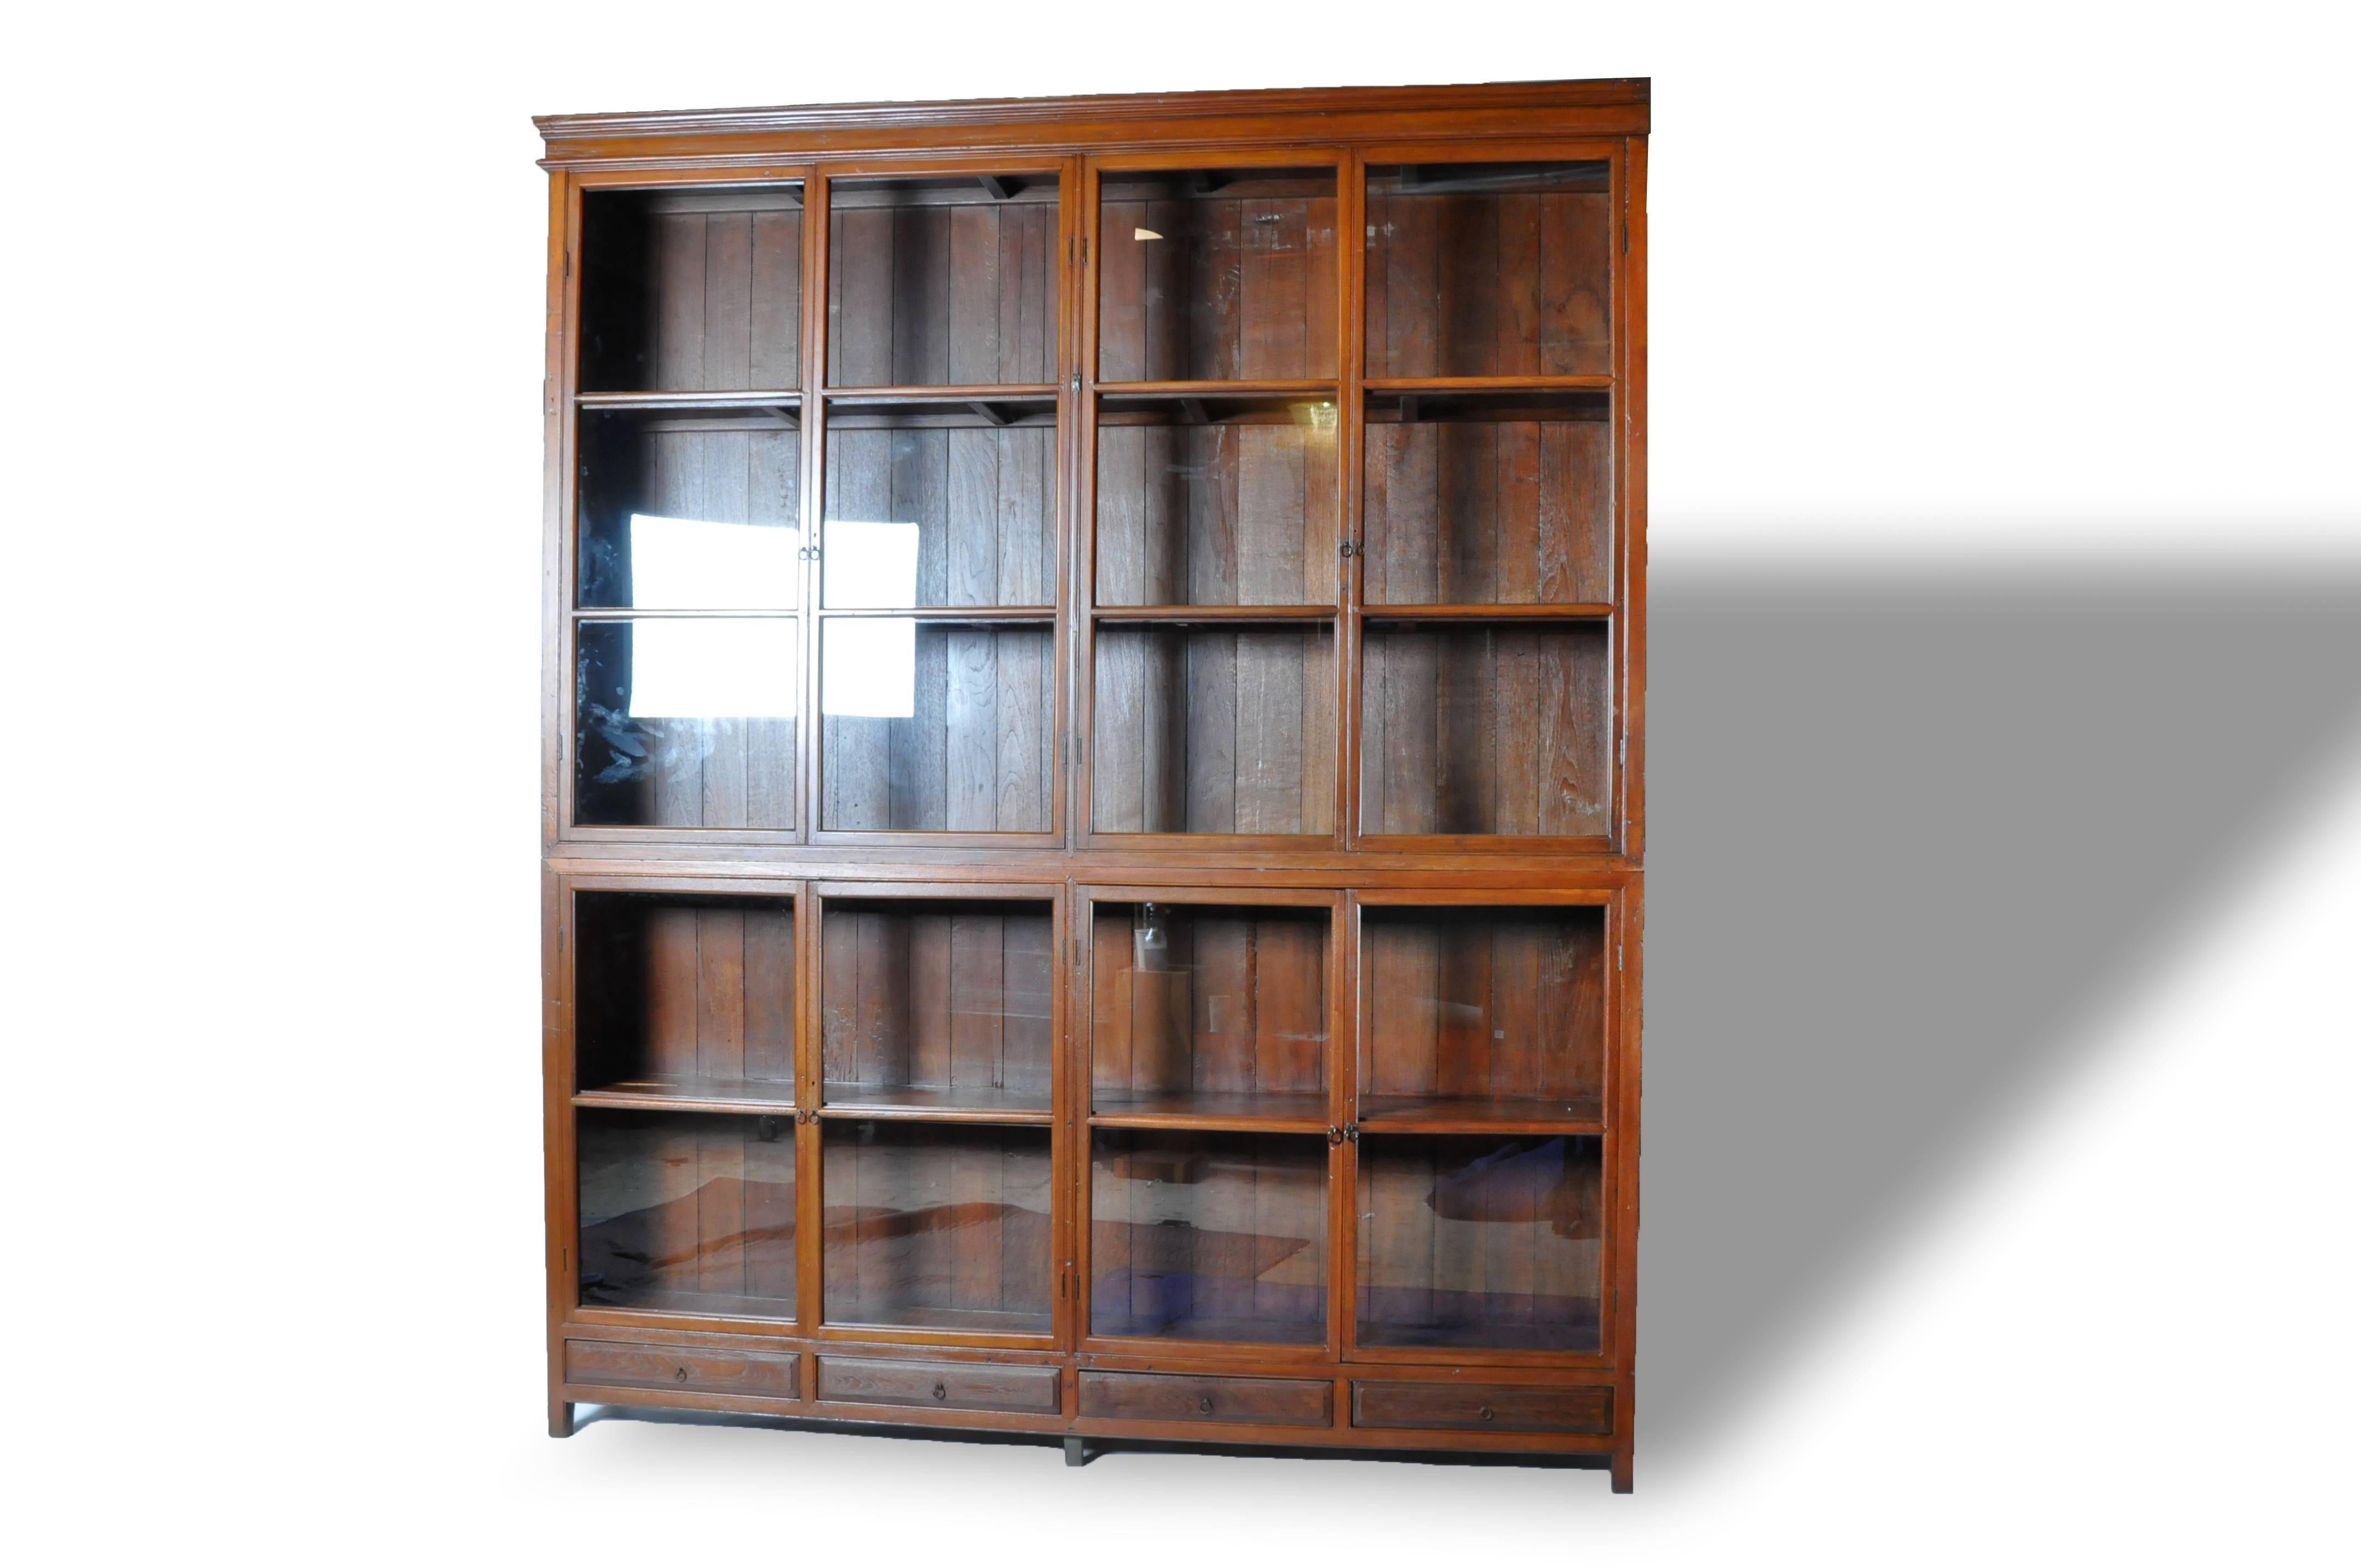 This impressive British Colonial bookcase comes in two parts; both the top and bottom have two pairs of glass paned doors that open to compartments lined with shelves. The lower section boasts ample storage space in the form of four drawer.